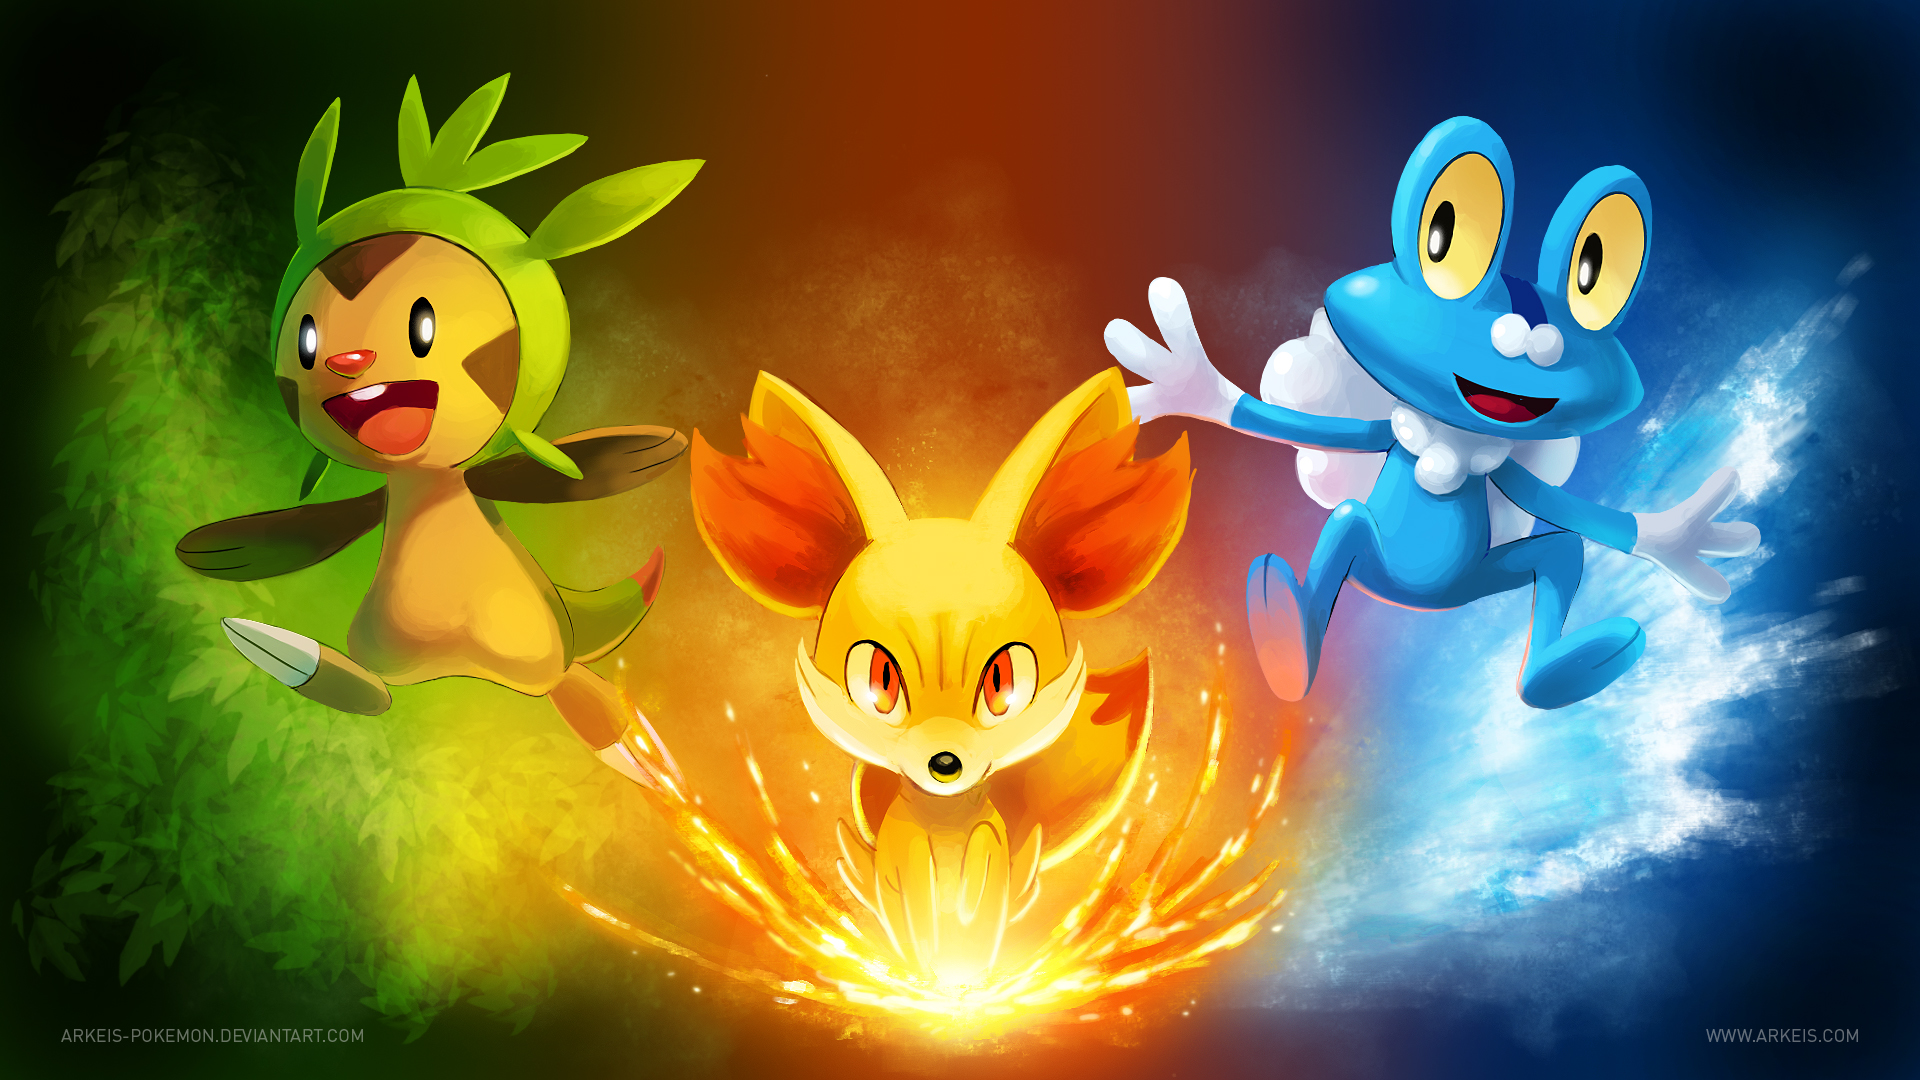 Free download human hybrid pokemonhhp clans of regions users x for your desktop mobile tablet explore new pokemon wallpaper new pokemon wallpapers pokemon backgrounds pokemon black background